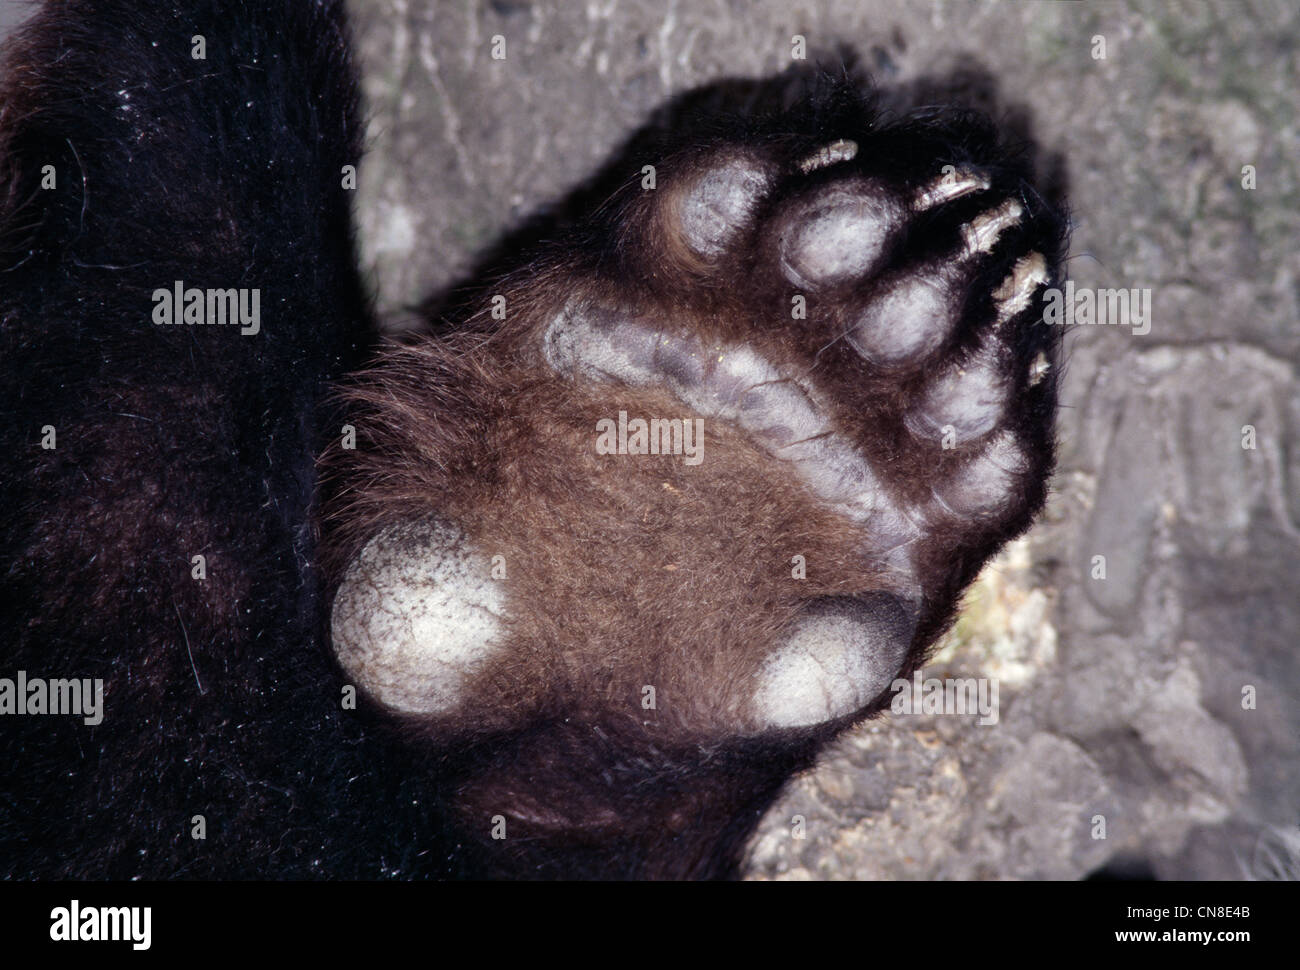 Panda's Paw High Resolution Stock Photography and Images - Alamy